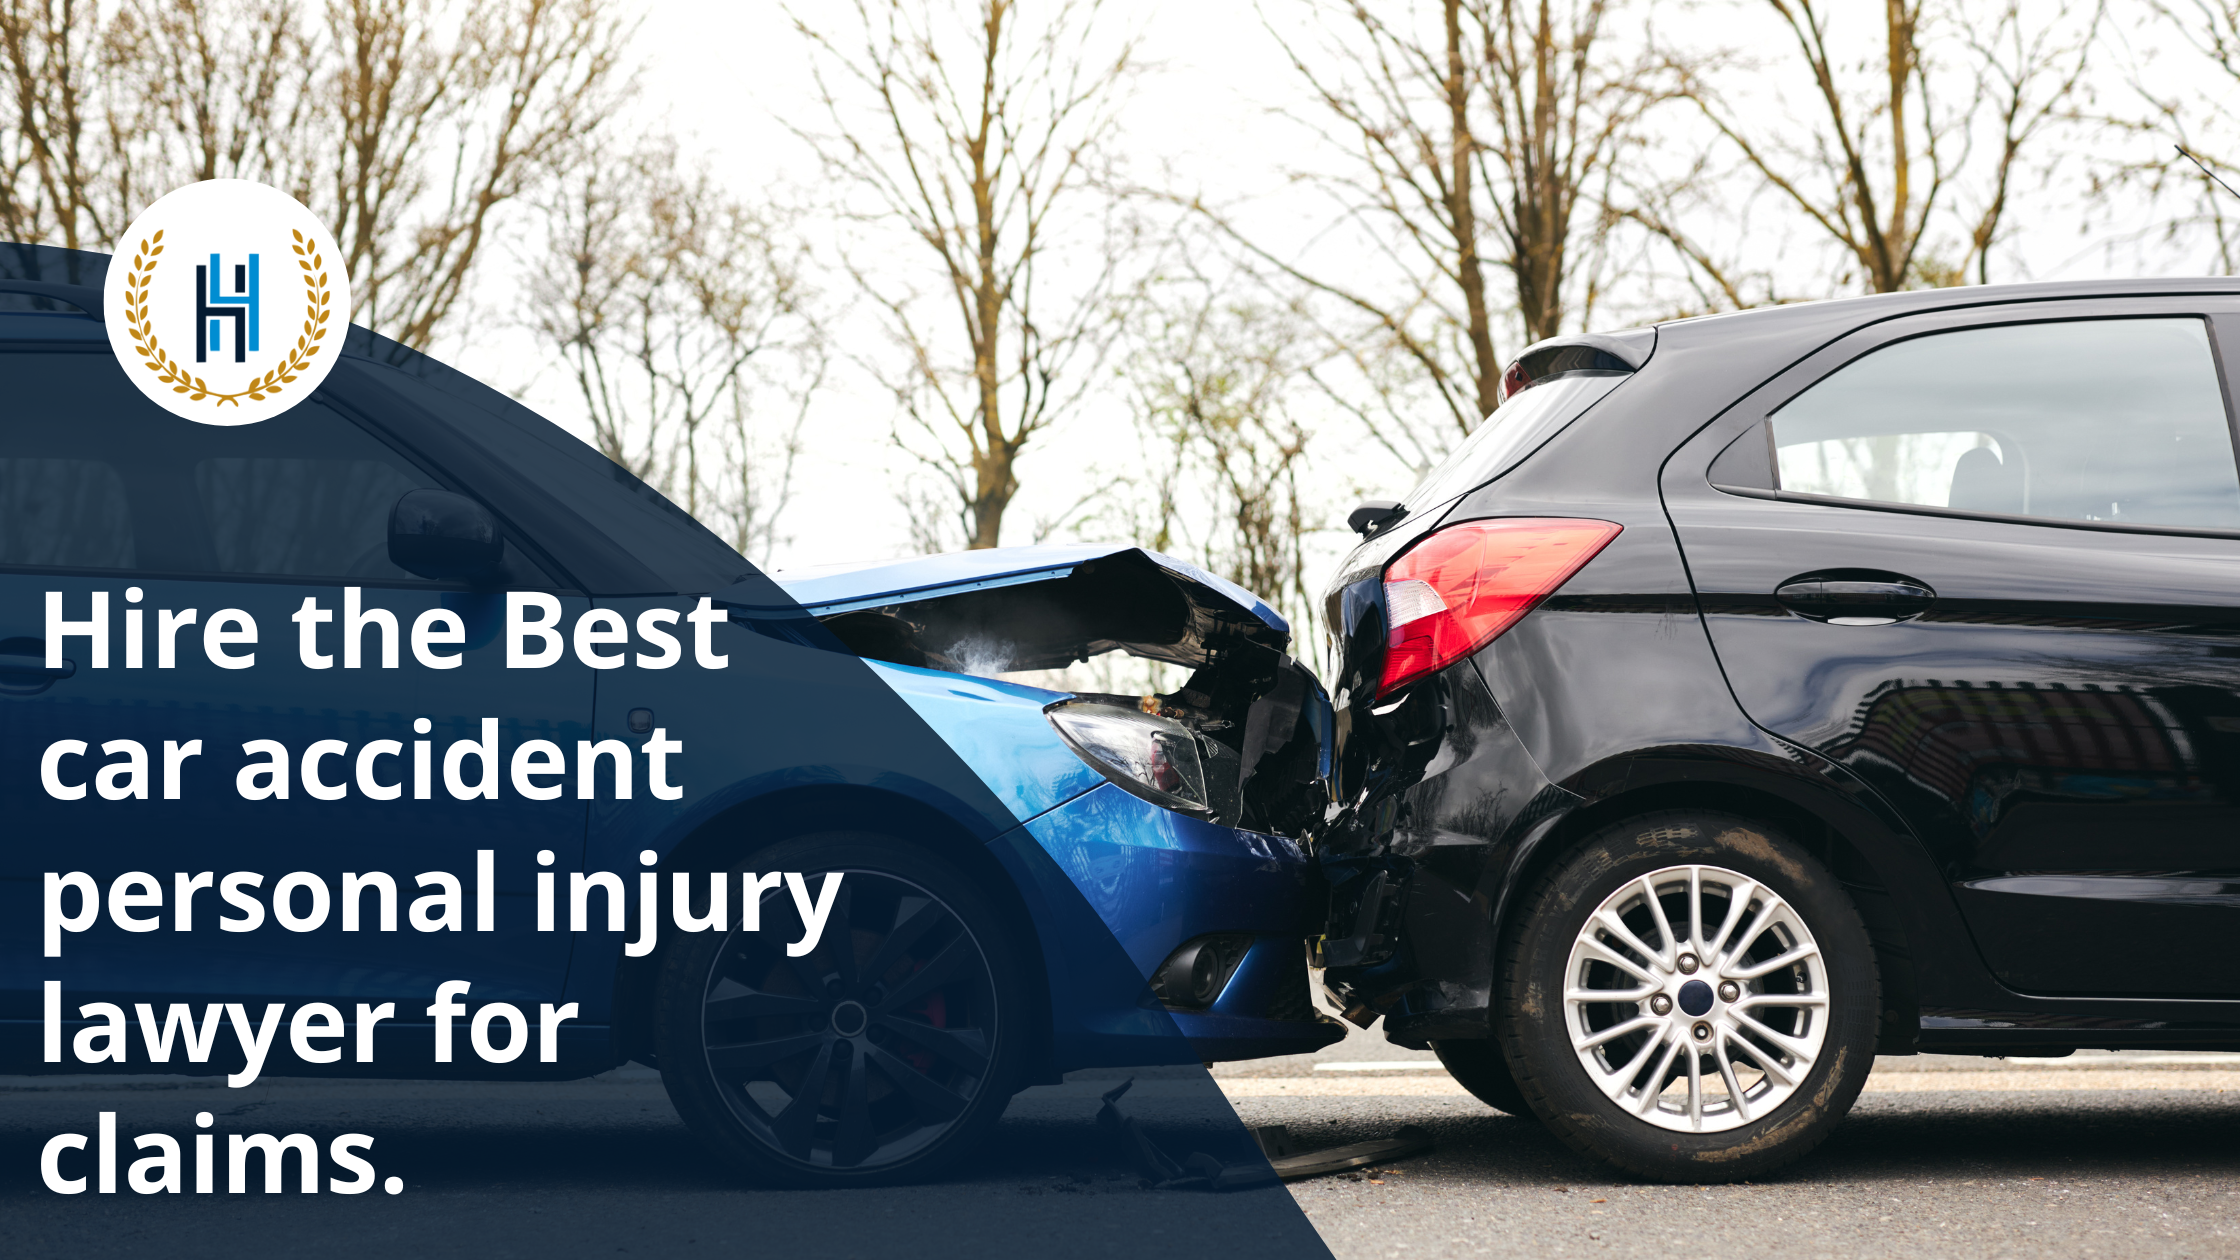 Hire the Best car accident personal injury lawyer for claims. | 2H Law